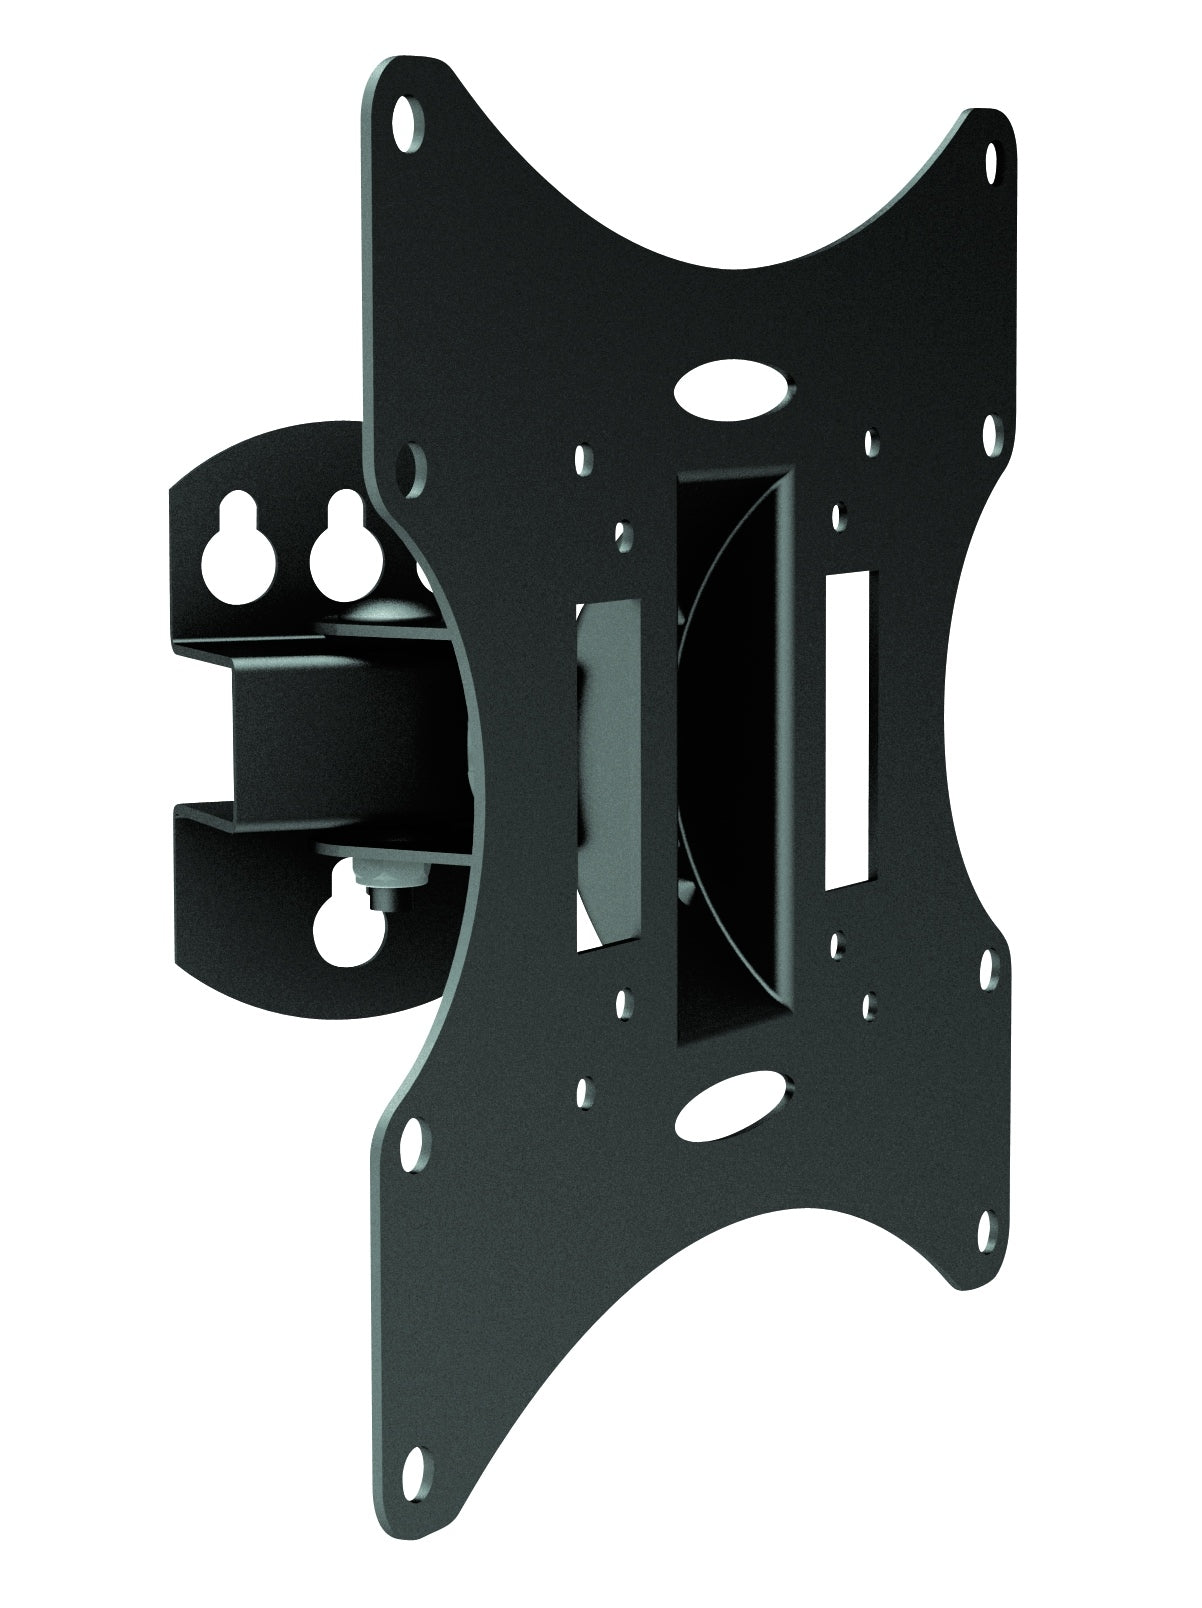 64-0501 Monitor / TV Wall Mount Bracket for 23-40 inch